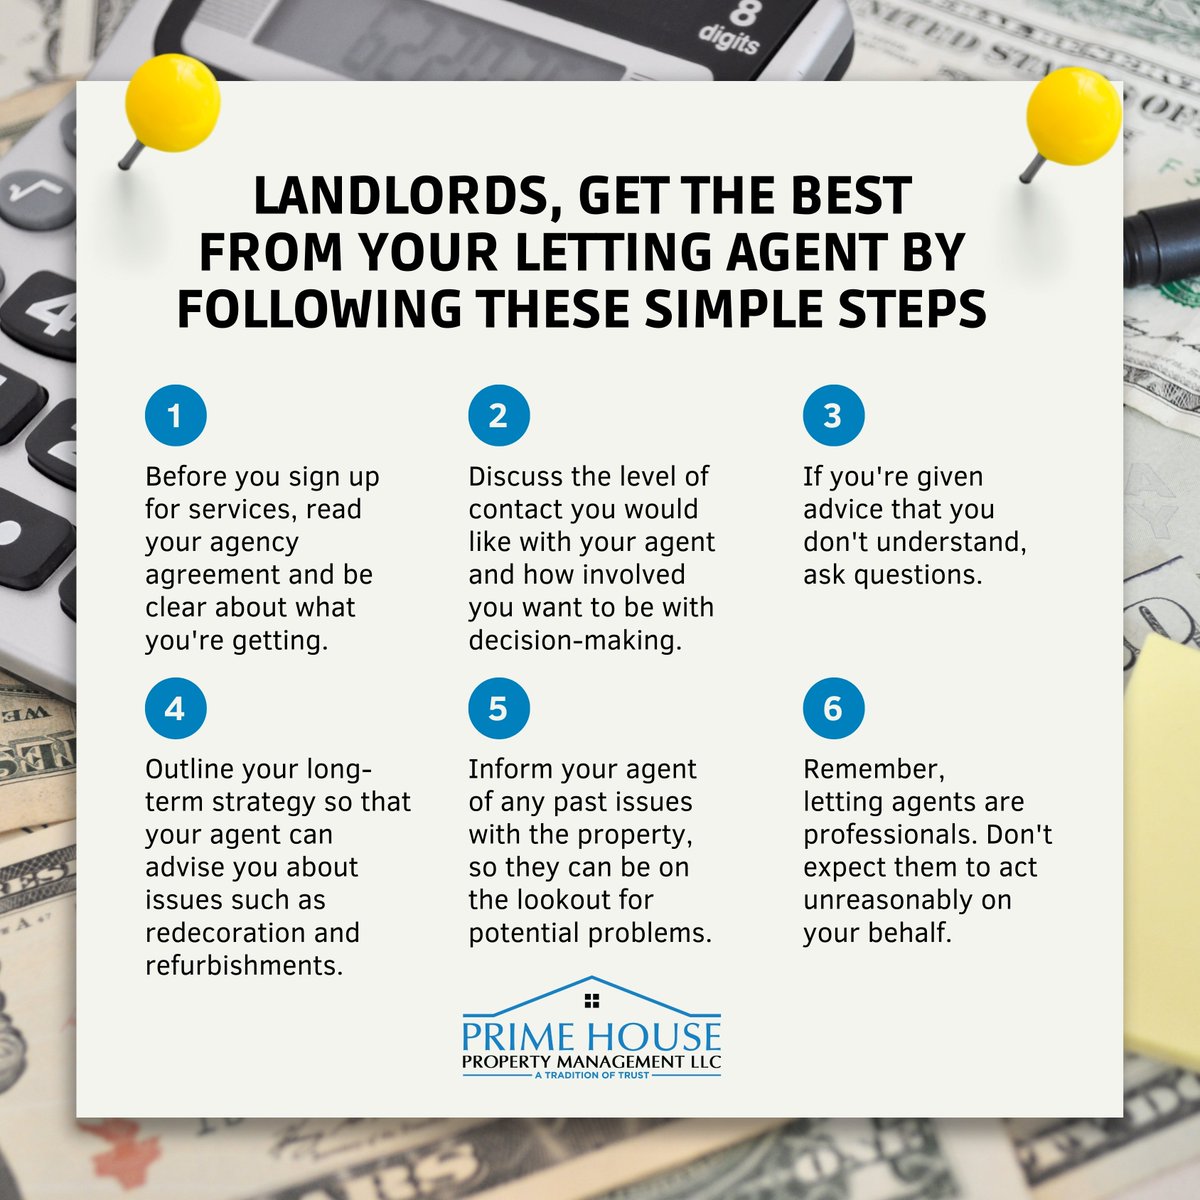 Landlords, get the best from your letting agent by following these simple steps.
----
🌐 primehouseproperties.com
.
#PropertyManagement #RealEstateManagement #PropertyPortfolio #RentalManagement